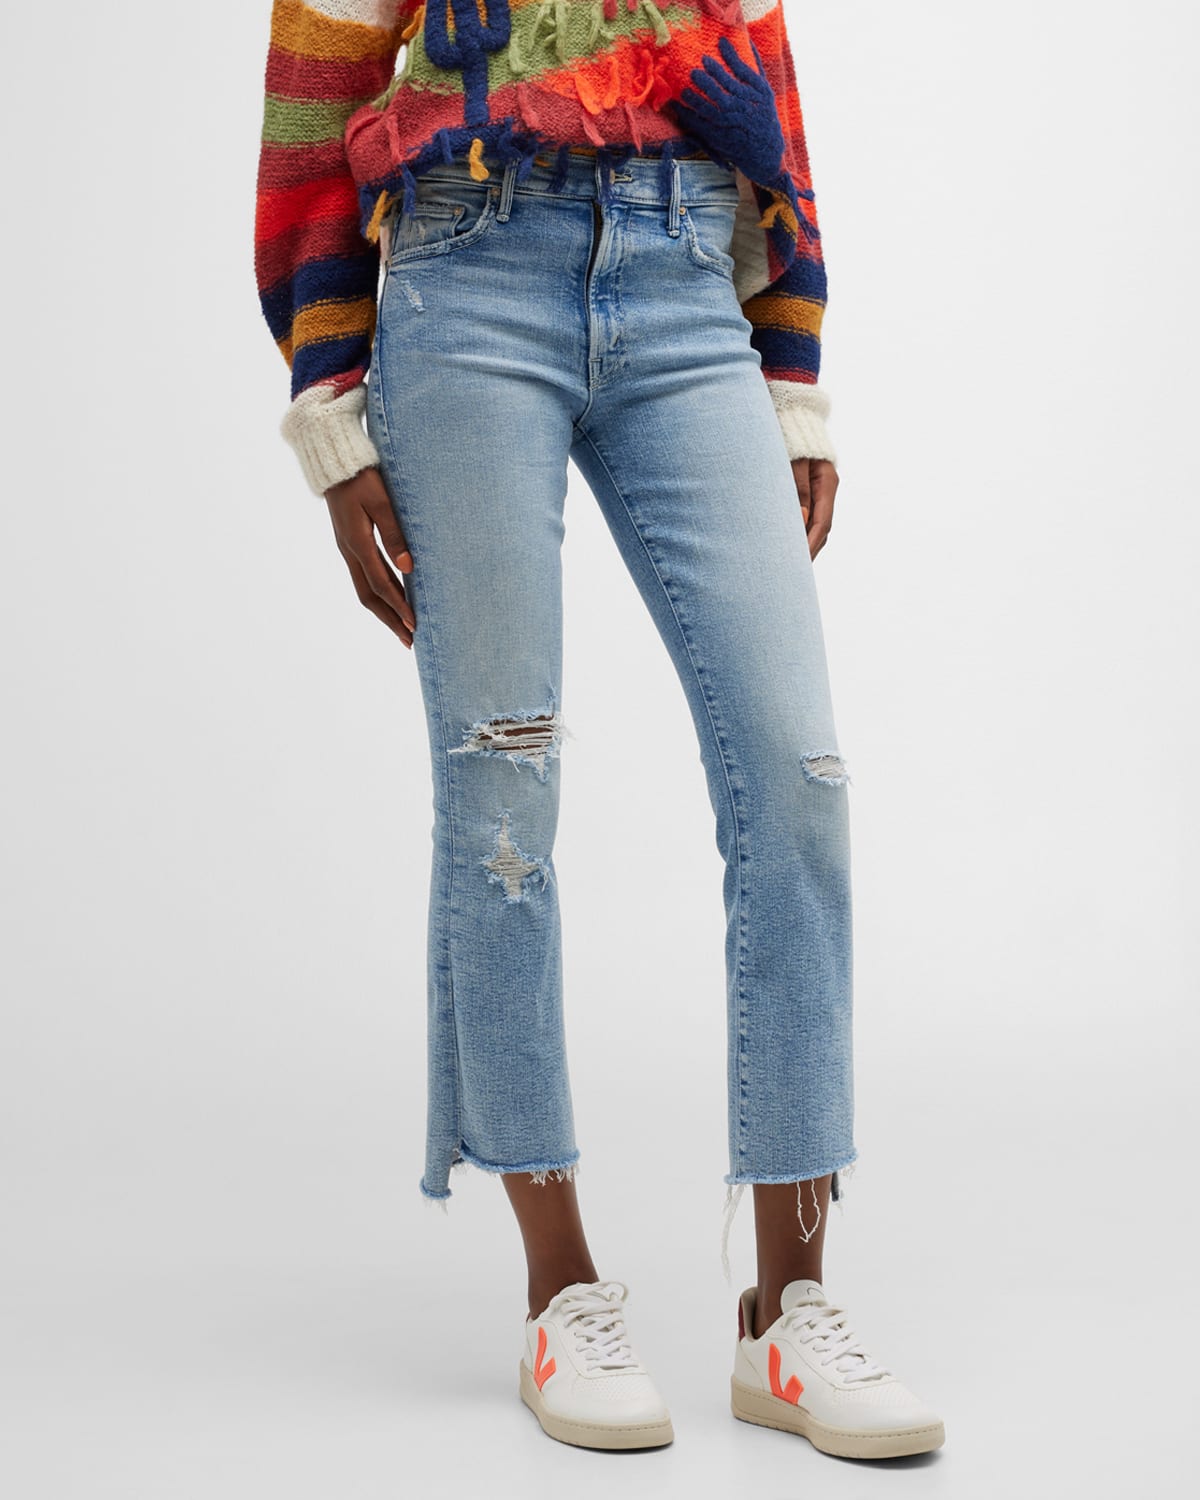 MOTHER THE INSIDER CROP STEP FRAY JEANS